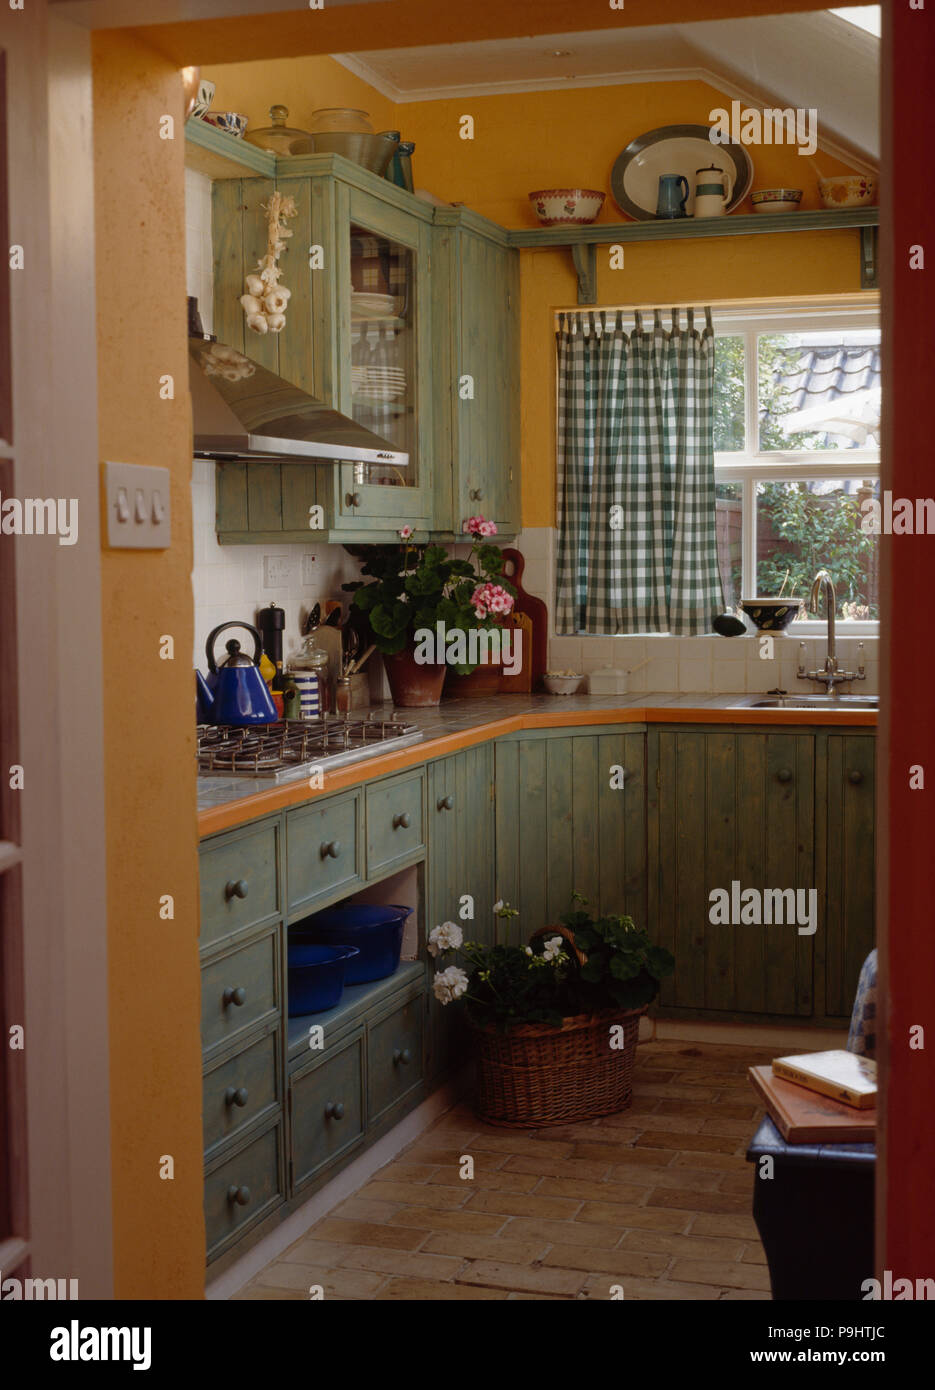 Pastel Green Cupboards And Units In Small Pale Orange Kitchen Extension With Green Checked Curtains Stock Photo Alamy